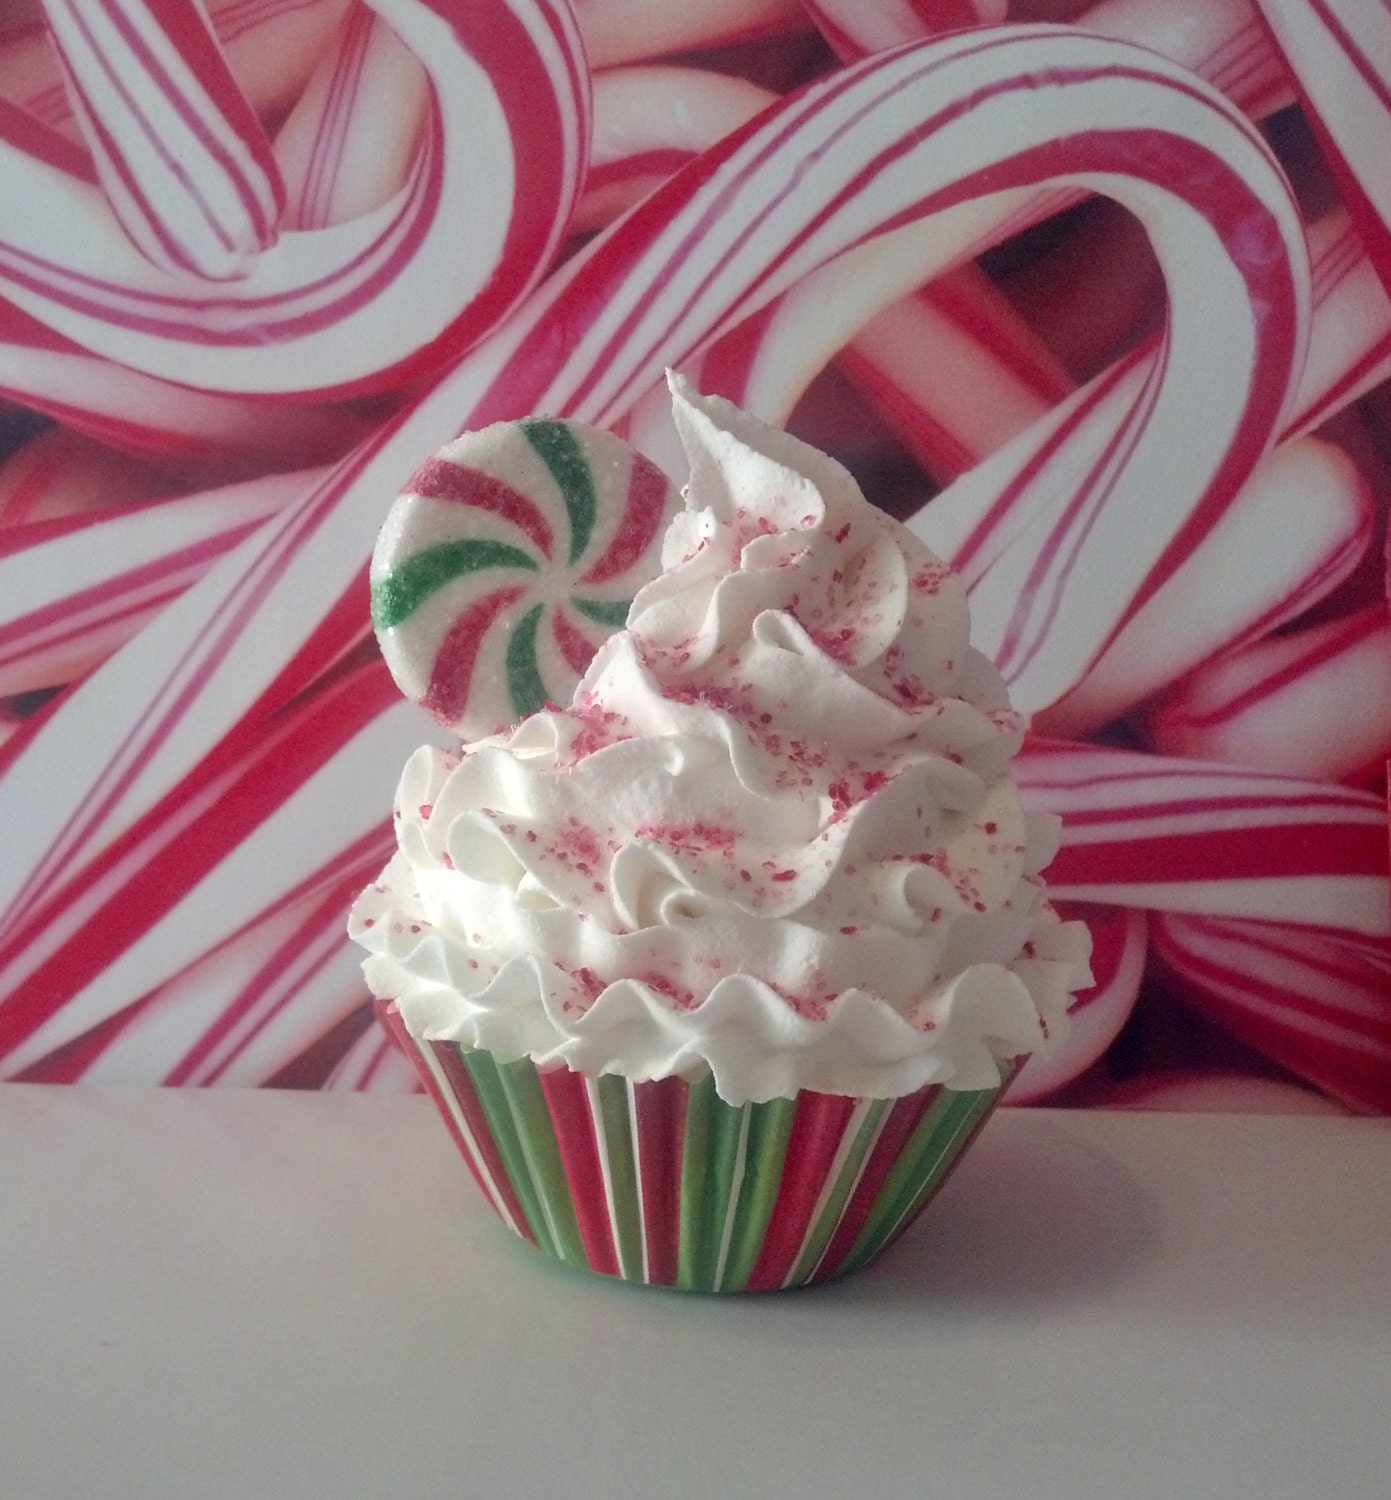 Peppermint Disc Fake Cupcake Christmas Ornament, Holiday Decorations, Photo Props, Home Accents, Party Decor, Secret Santa Gifts